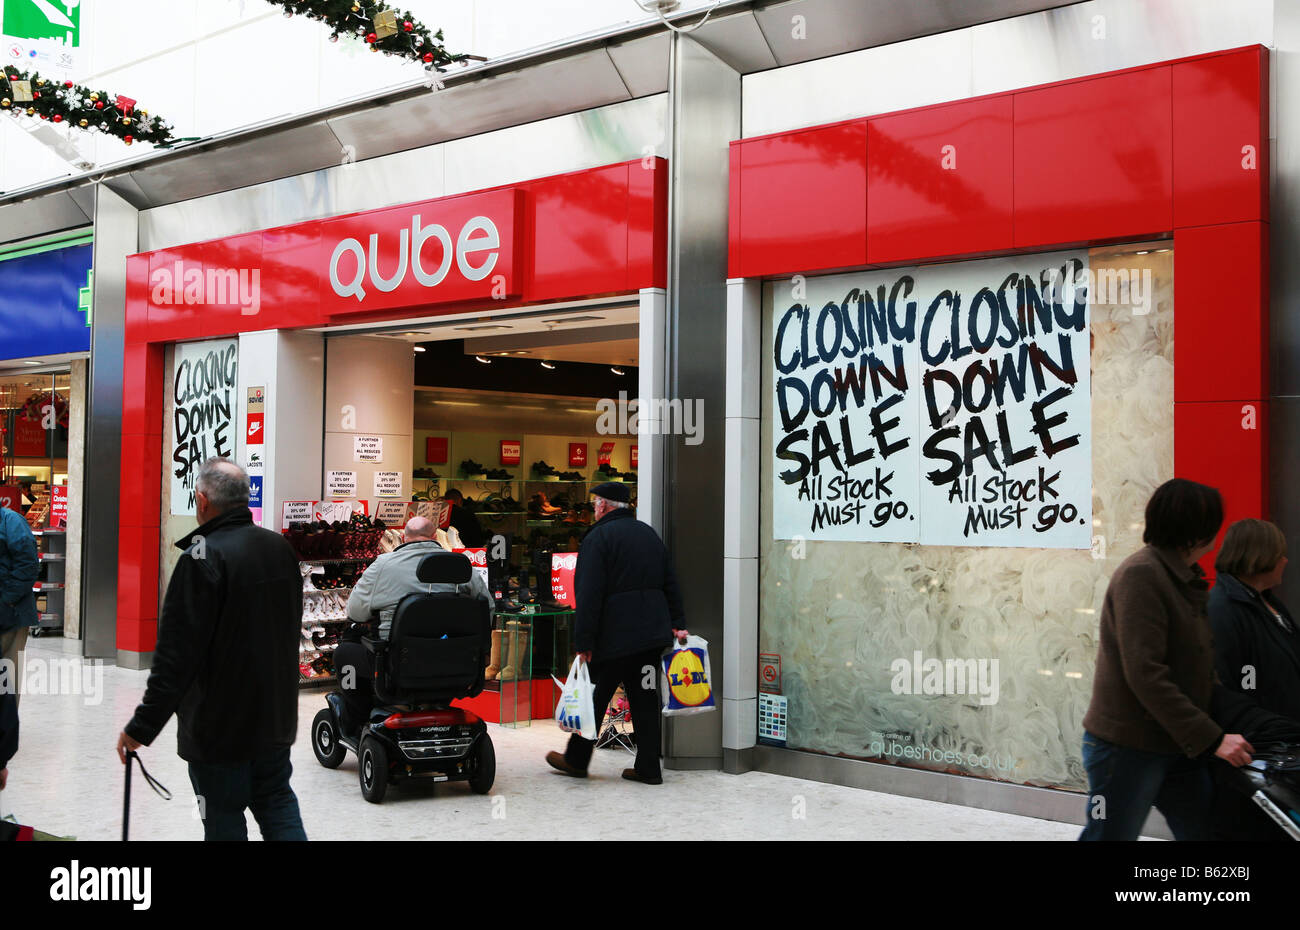 UK highstreet shopping centre mall retail shop outlet with closing down sale all stock must go sign in window recession victim Stock Photo